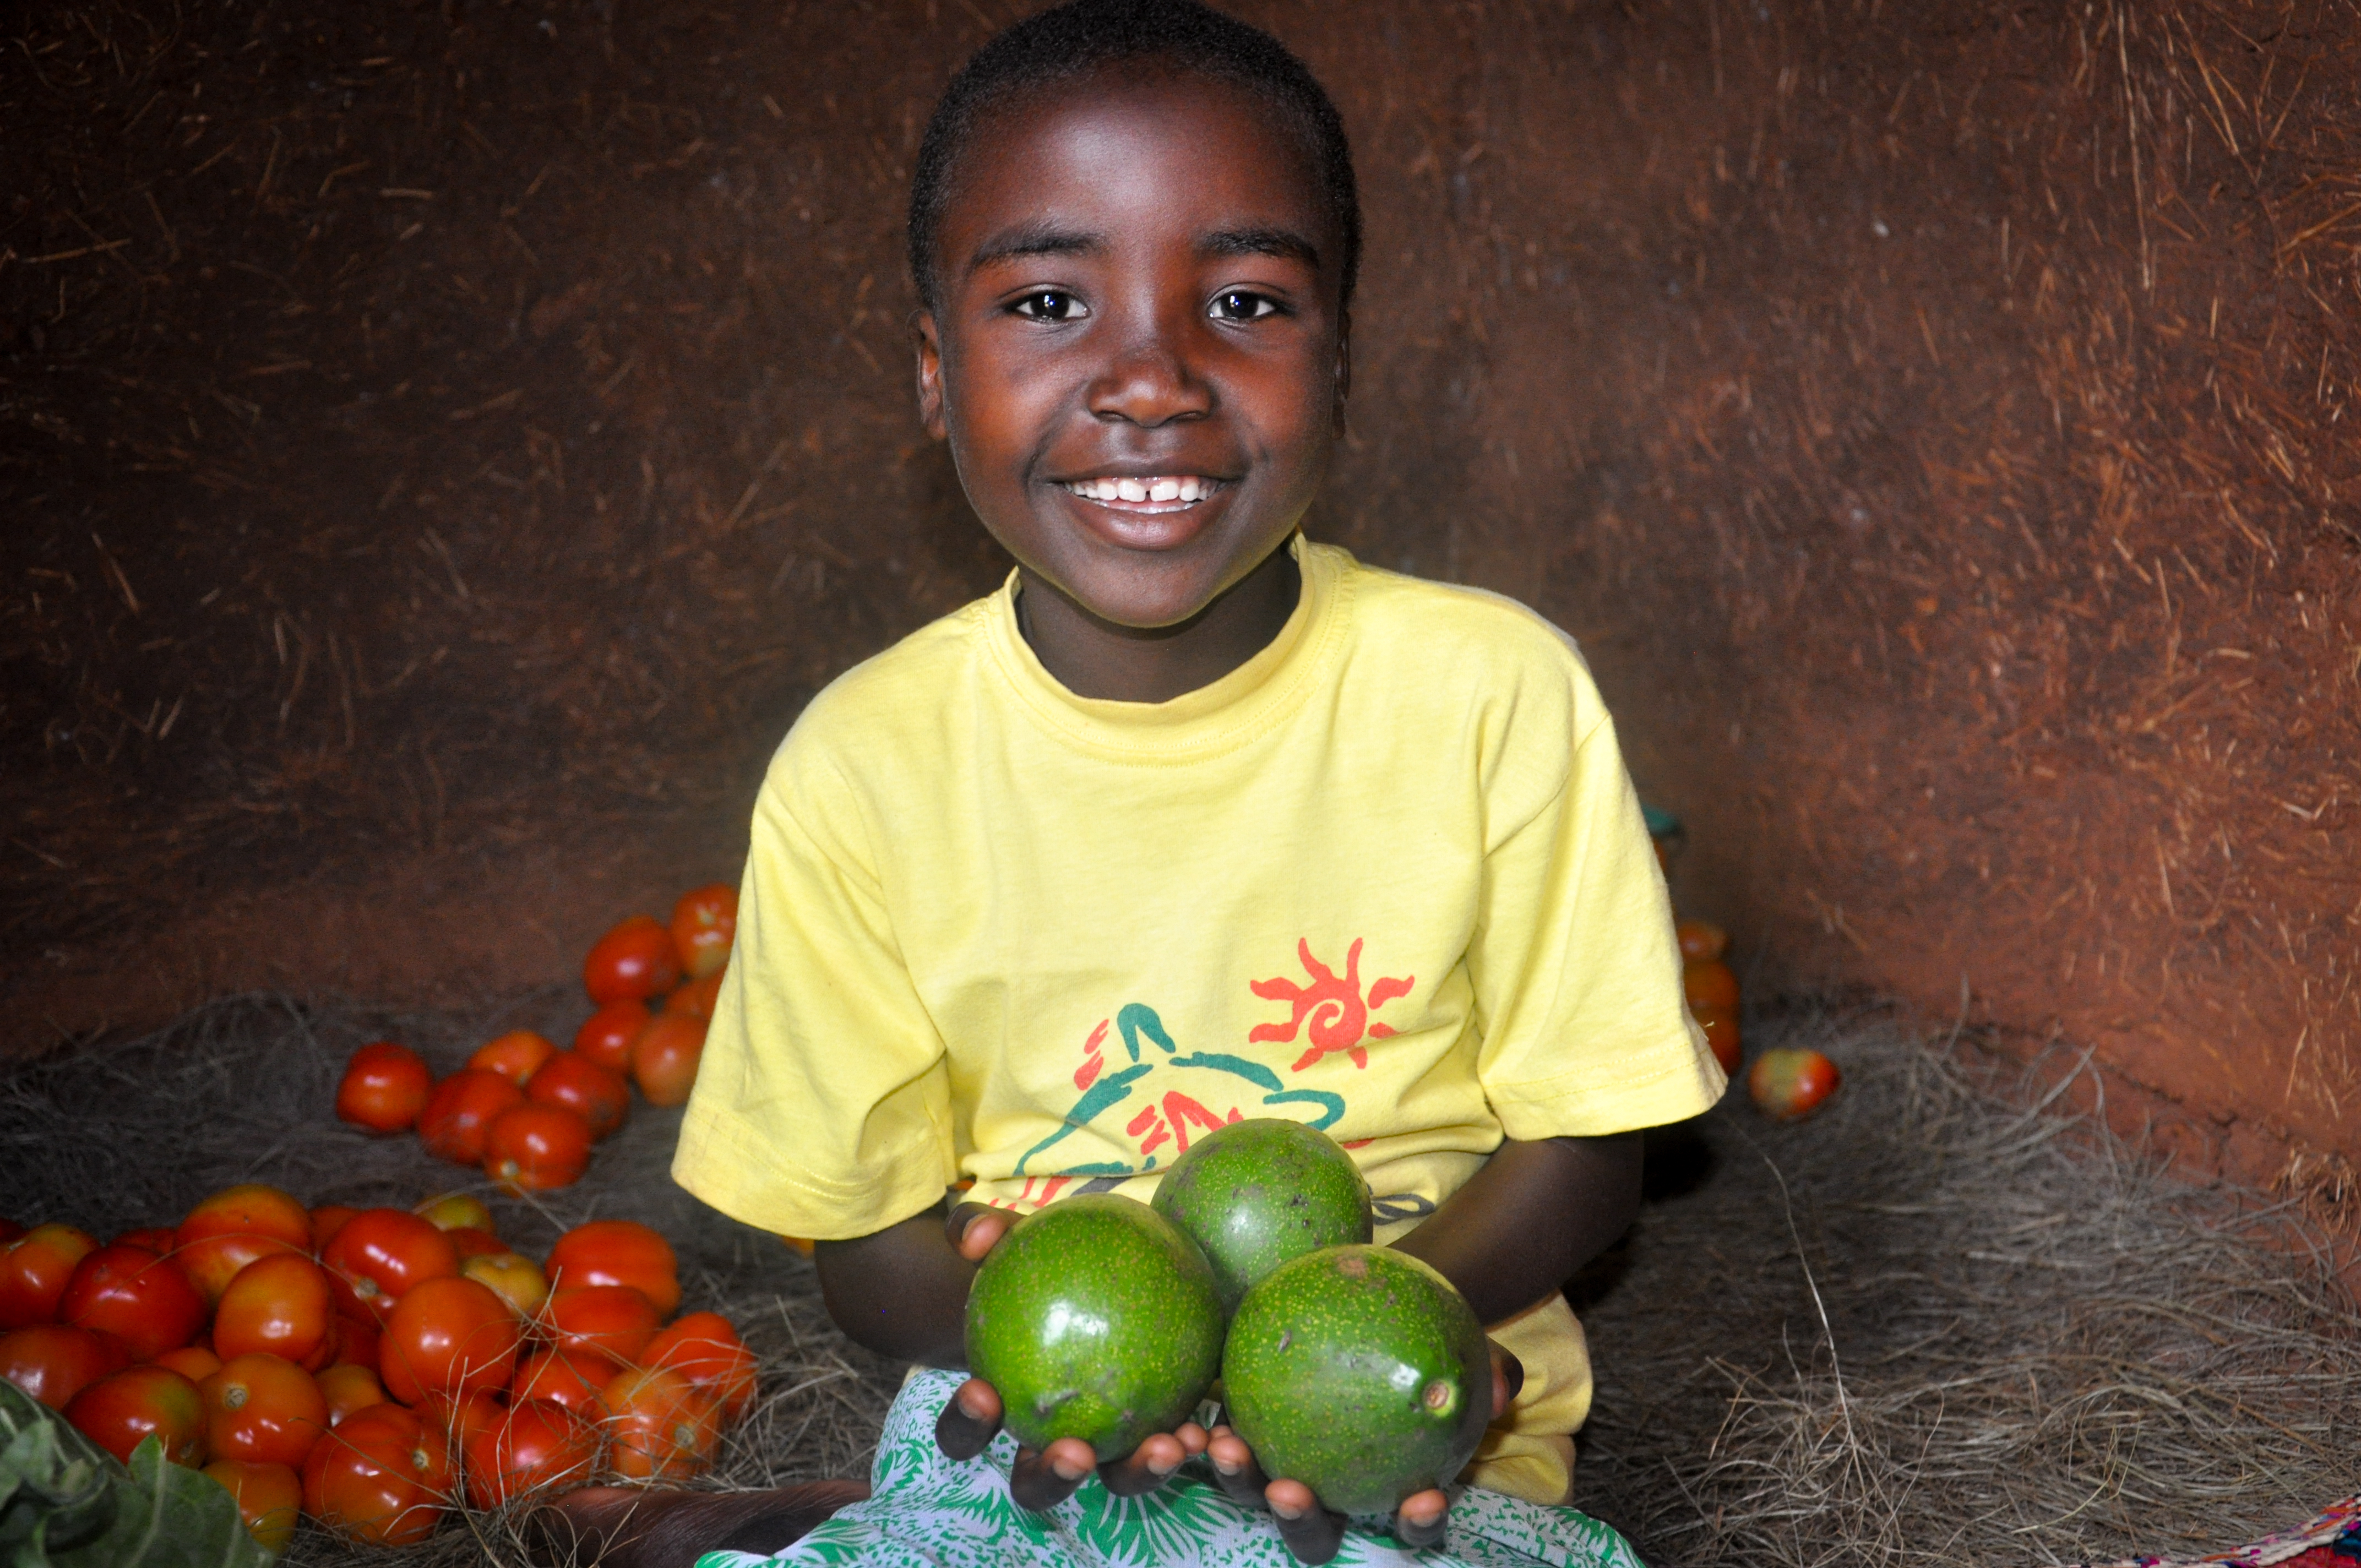 A World Vision Tanzania sponsored child Vanessa (6) happily holding avocadoes which shows food security at her home in Kitoko village located in north western Tanzania